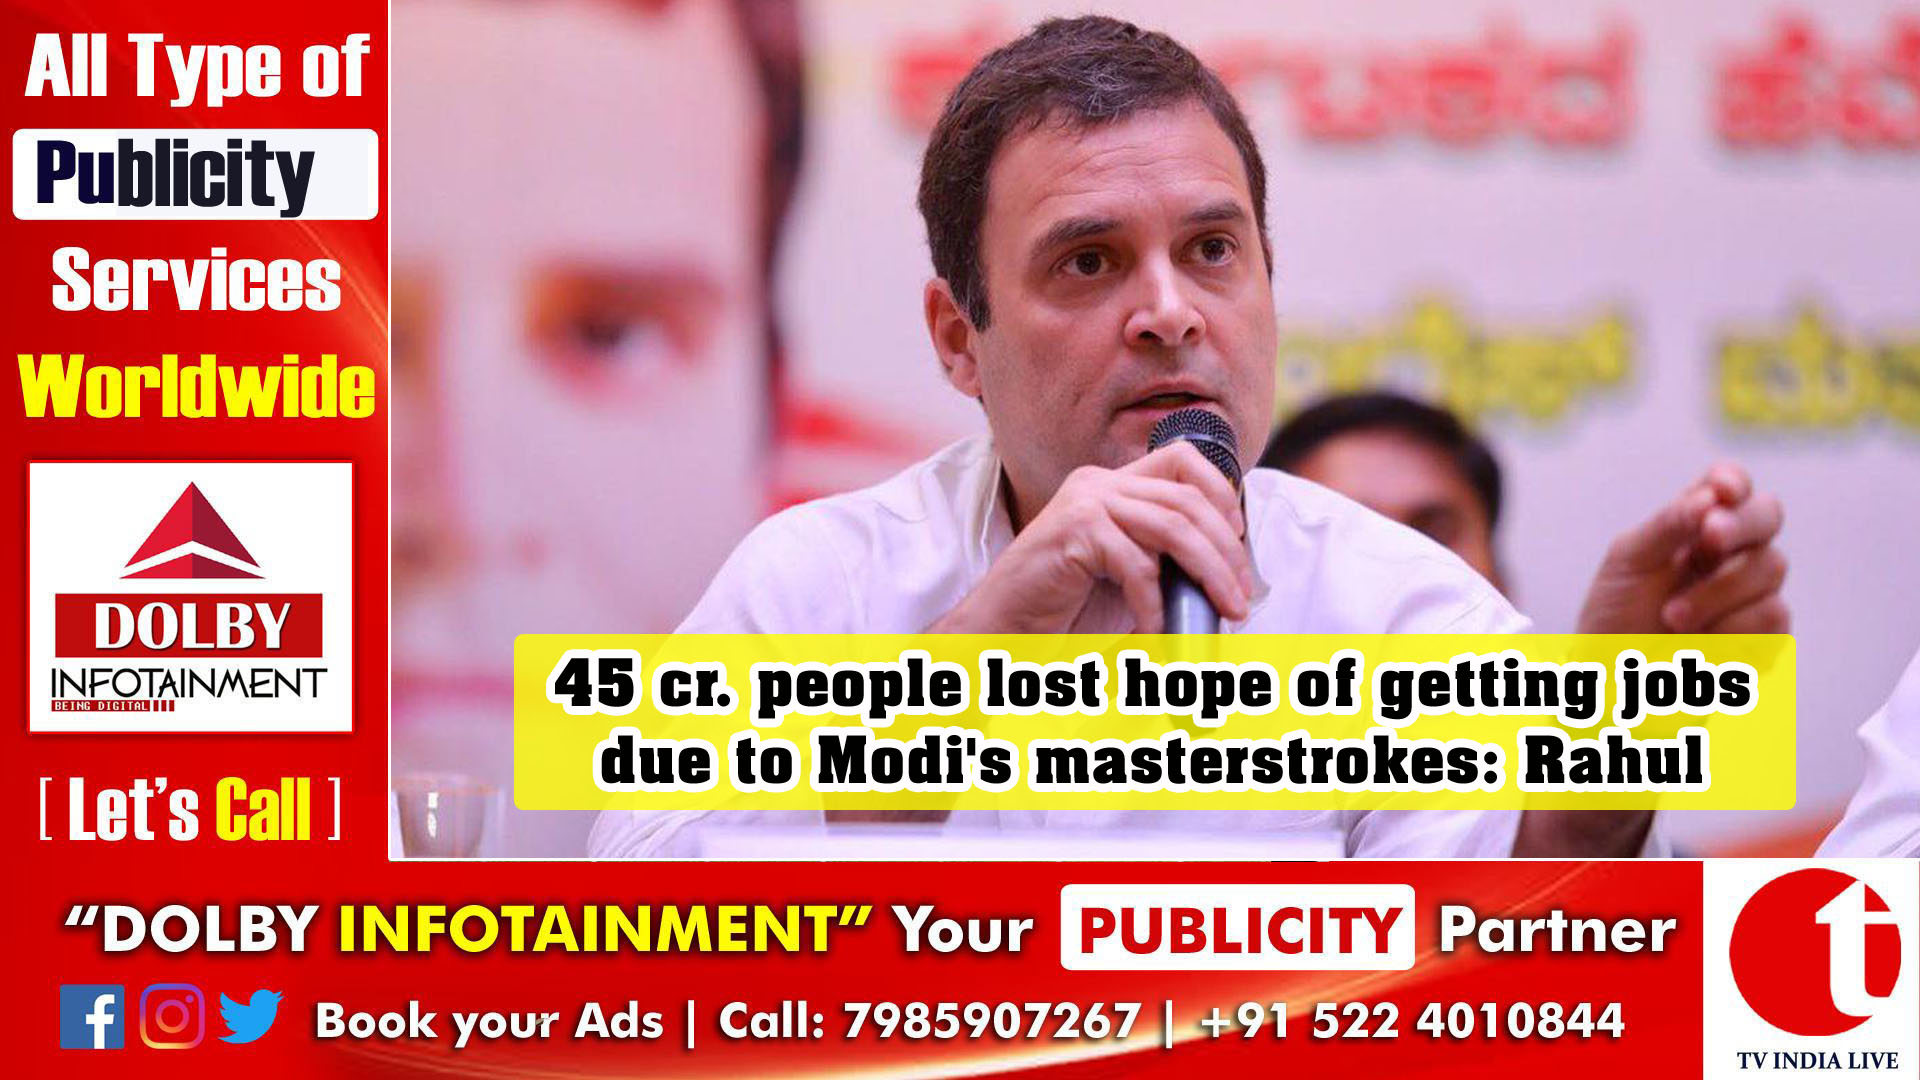 45 cr. people lost hope of getting jobs due to Modi's masterstrokes: Rahul Gandhi